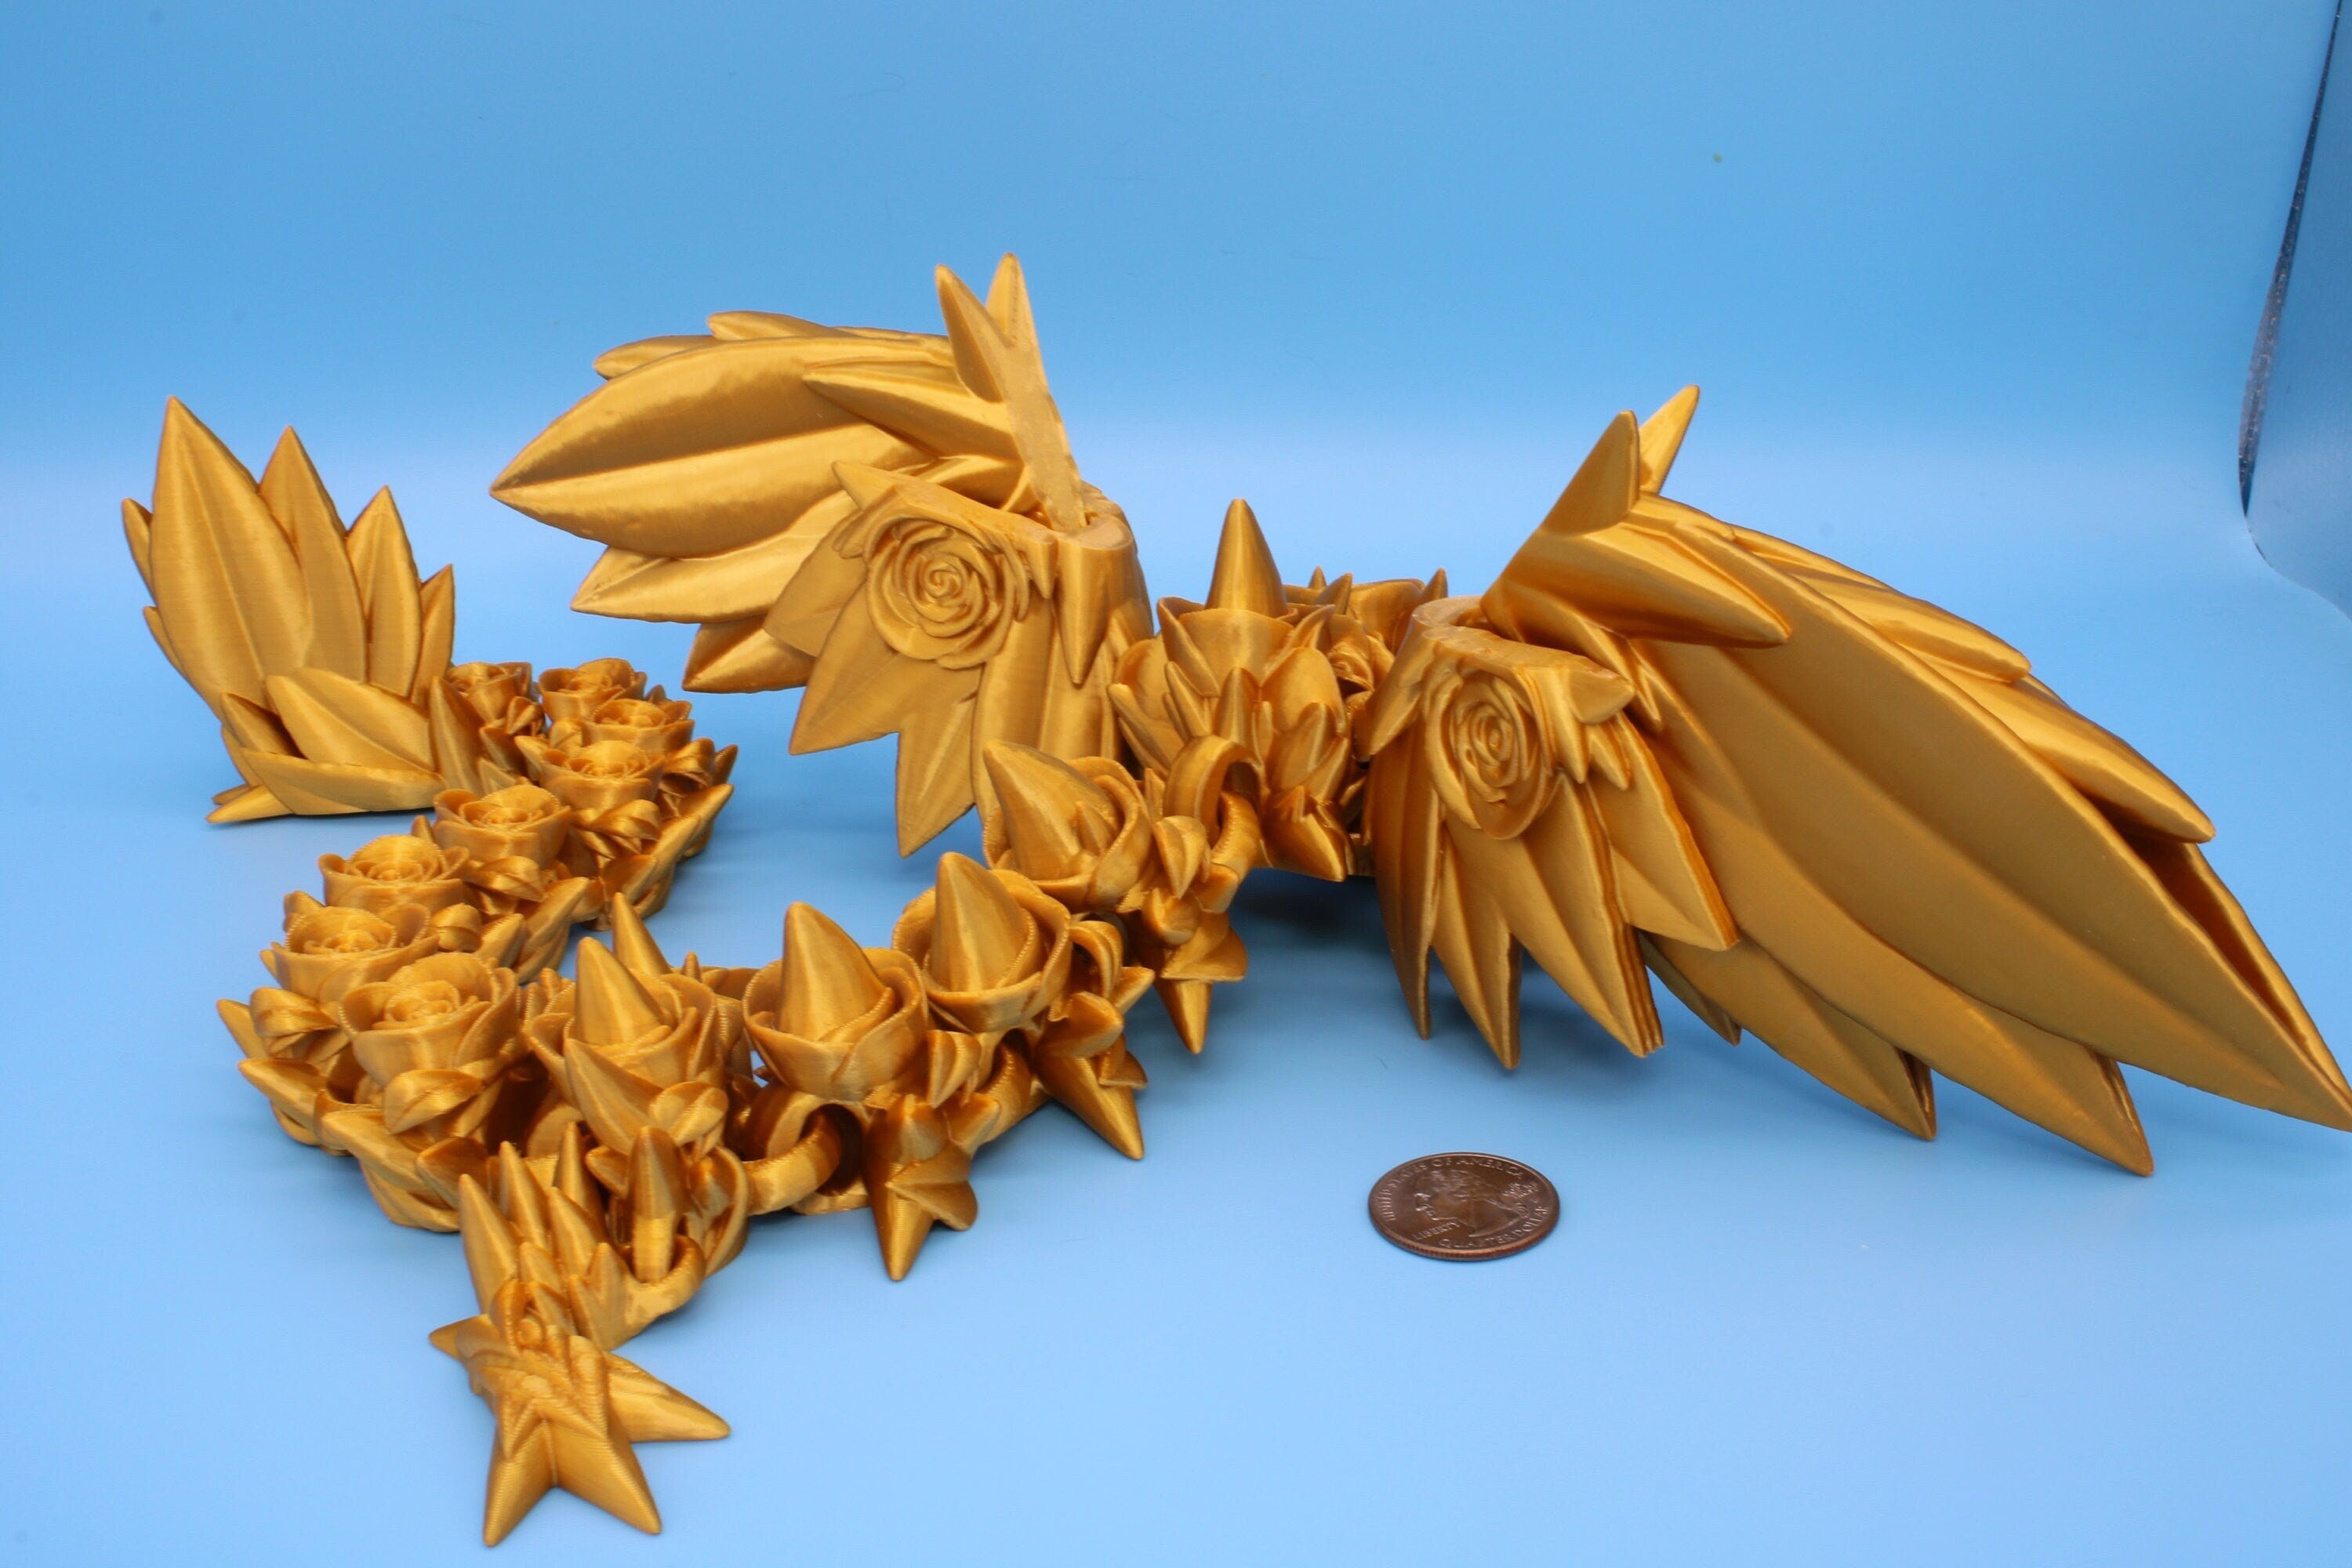 Gold Rose Wing Articulating Dragon | 3D Printed Fidget | Flexi Toy | Adult Fidget Toy | Sensory Desk Toy | 19 in. | Valentines Day